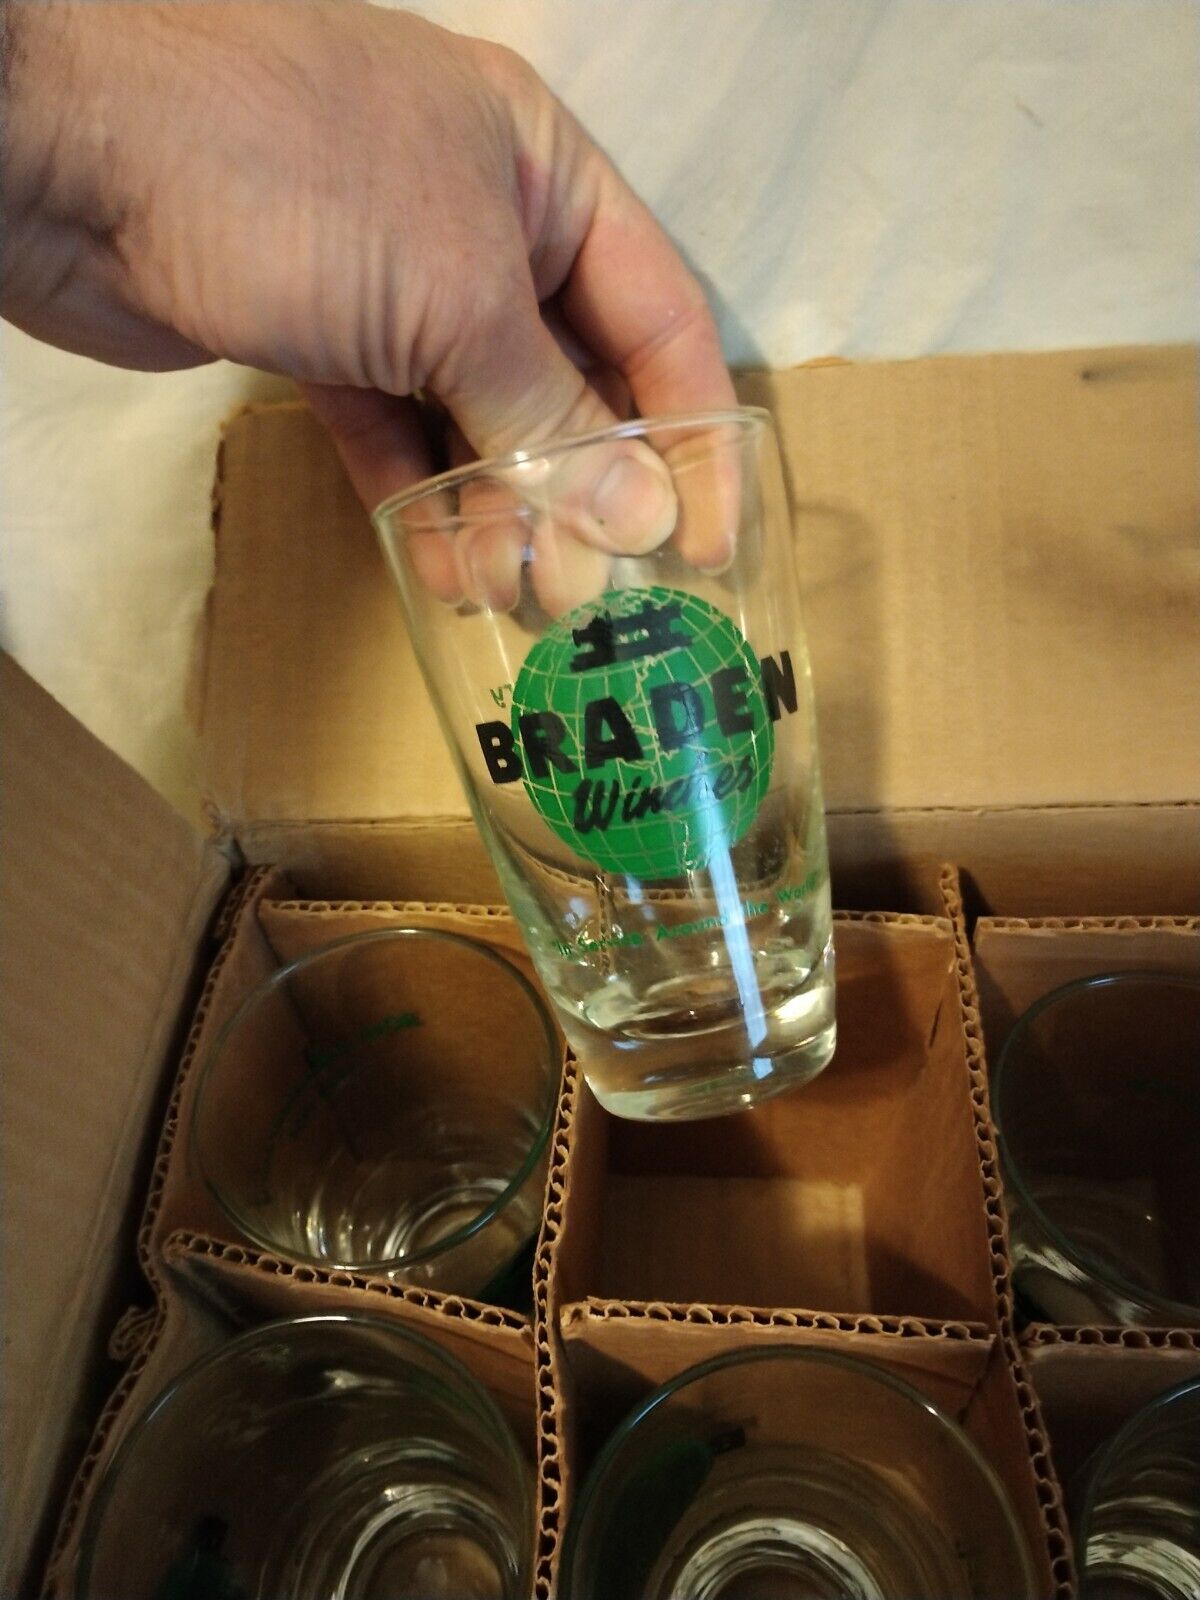 8 NOS BRADEN WINCHES 1924-1954 DRINK GLASSES WITH THEIR LOGO IN ORIGINAL BOX